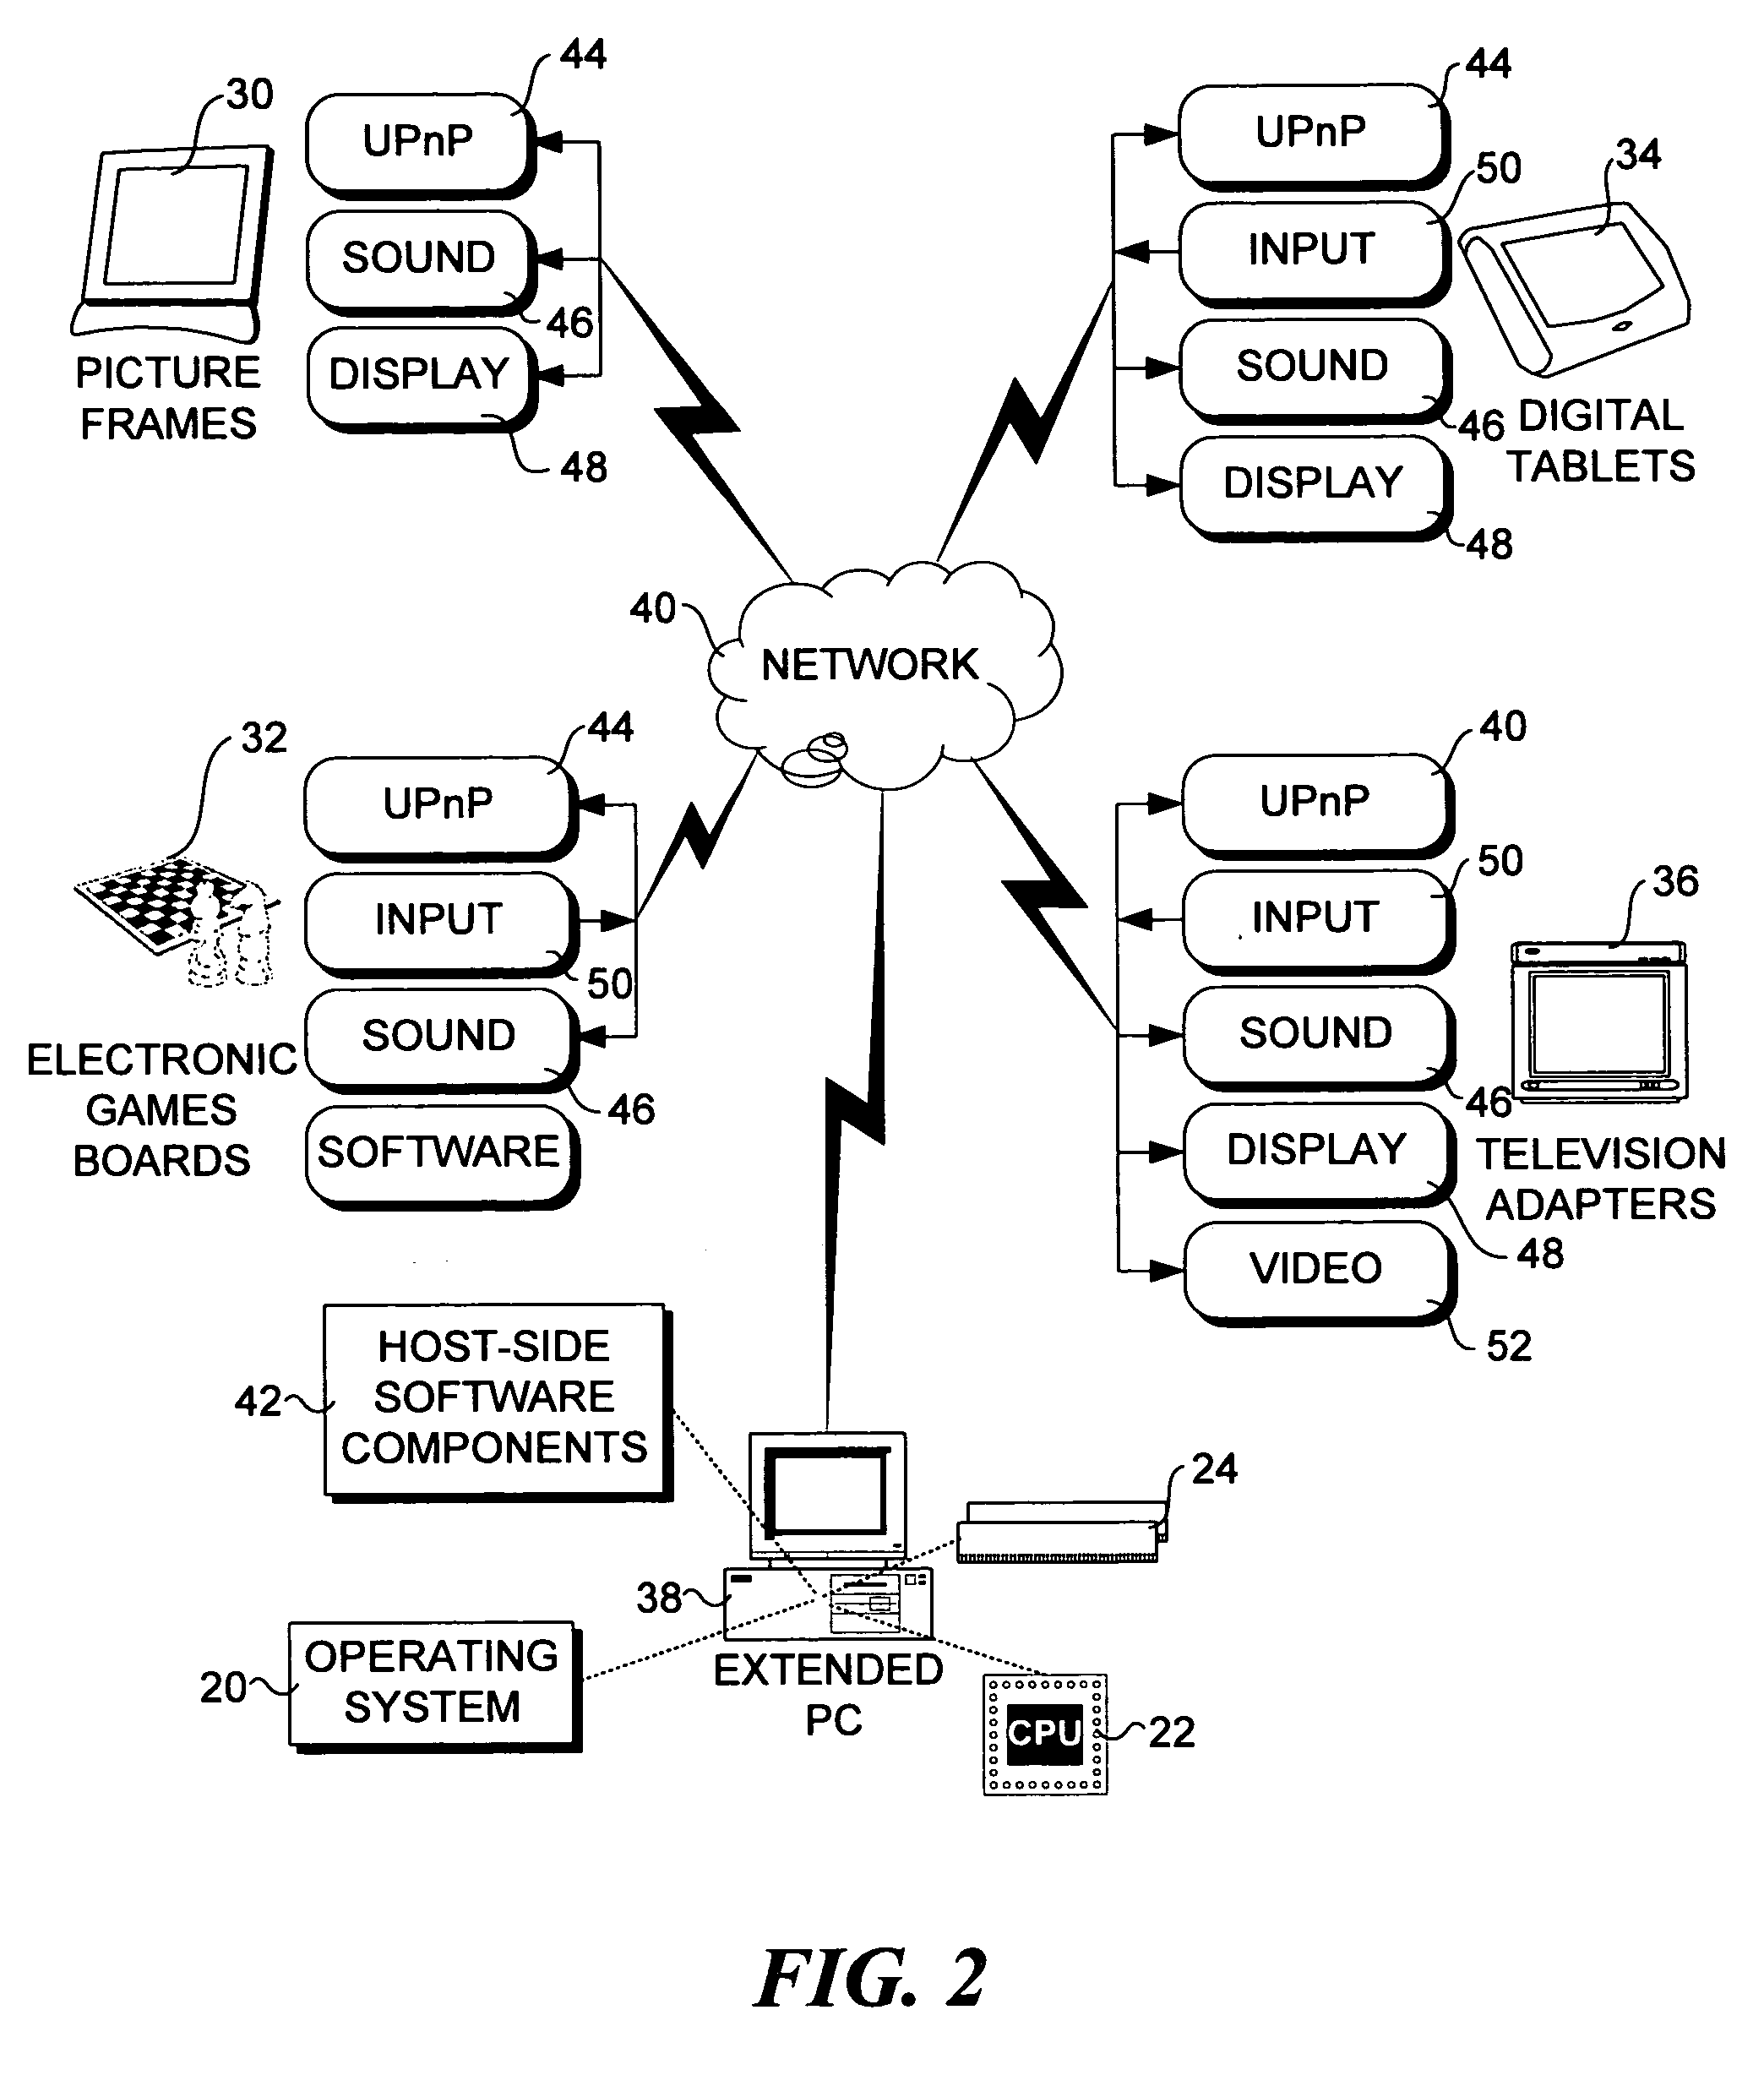 Method and architecture to support interaction between a host computer and remote devices